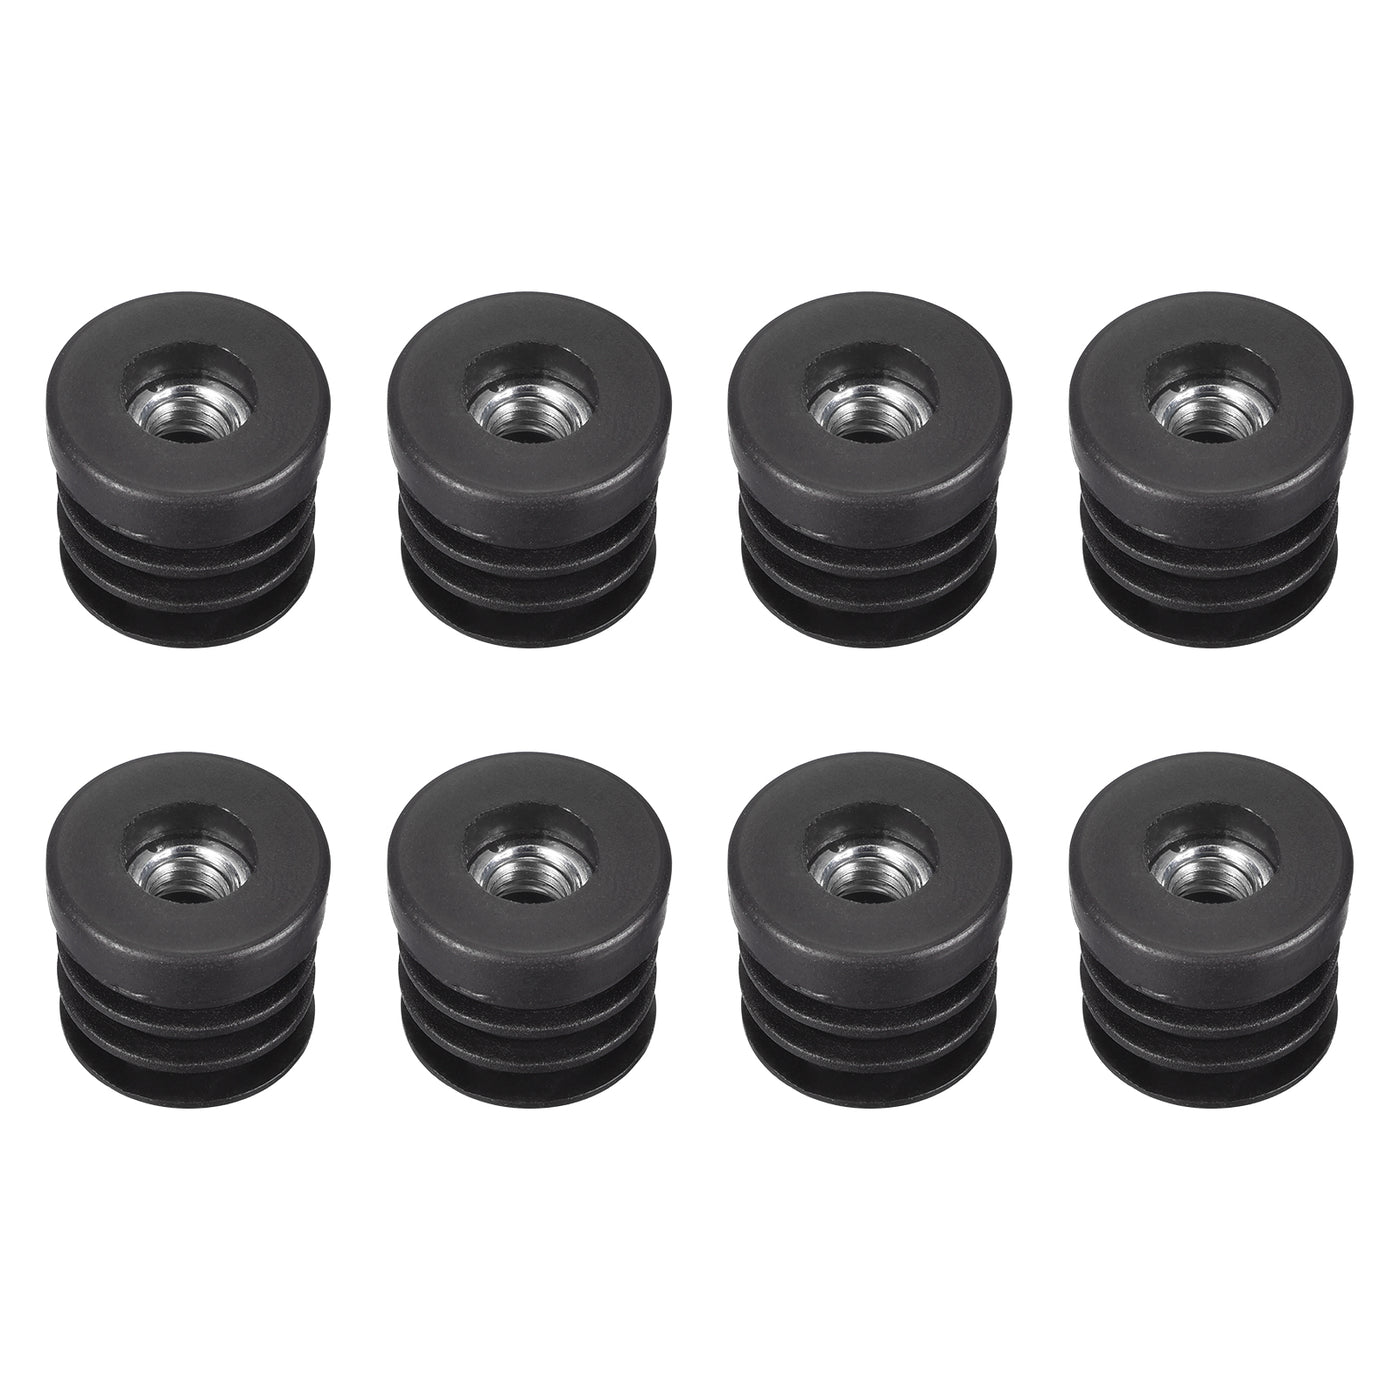 uxcell Uxcell 8Pcs 25mm/0.98" Caster Insert with Thread, Round M8 Thread for Furniture